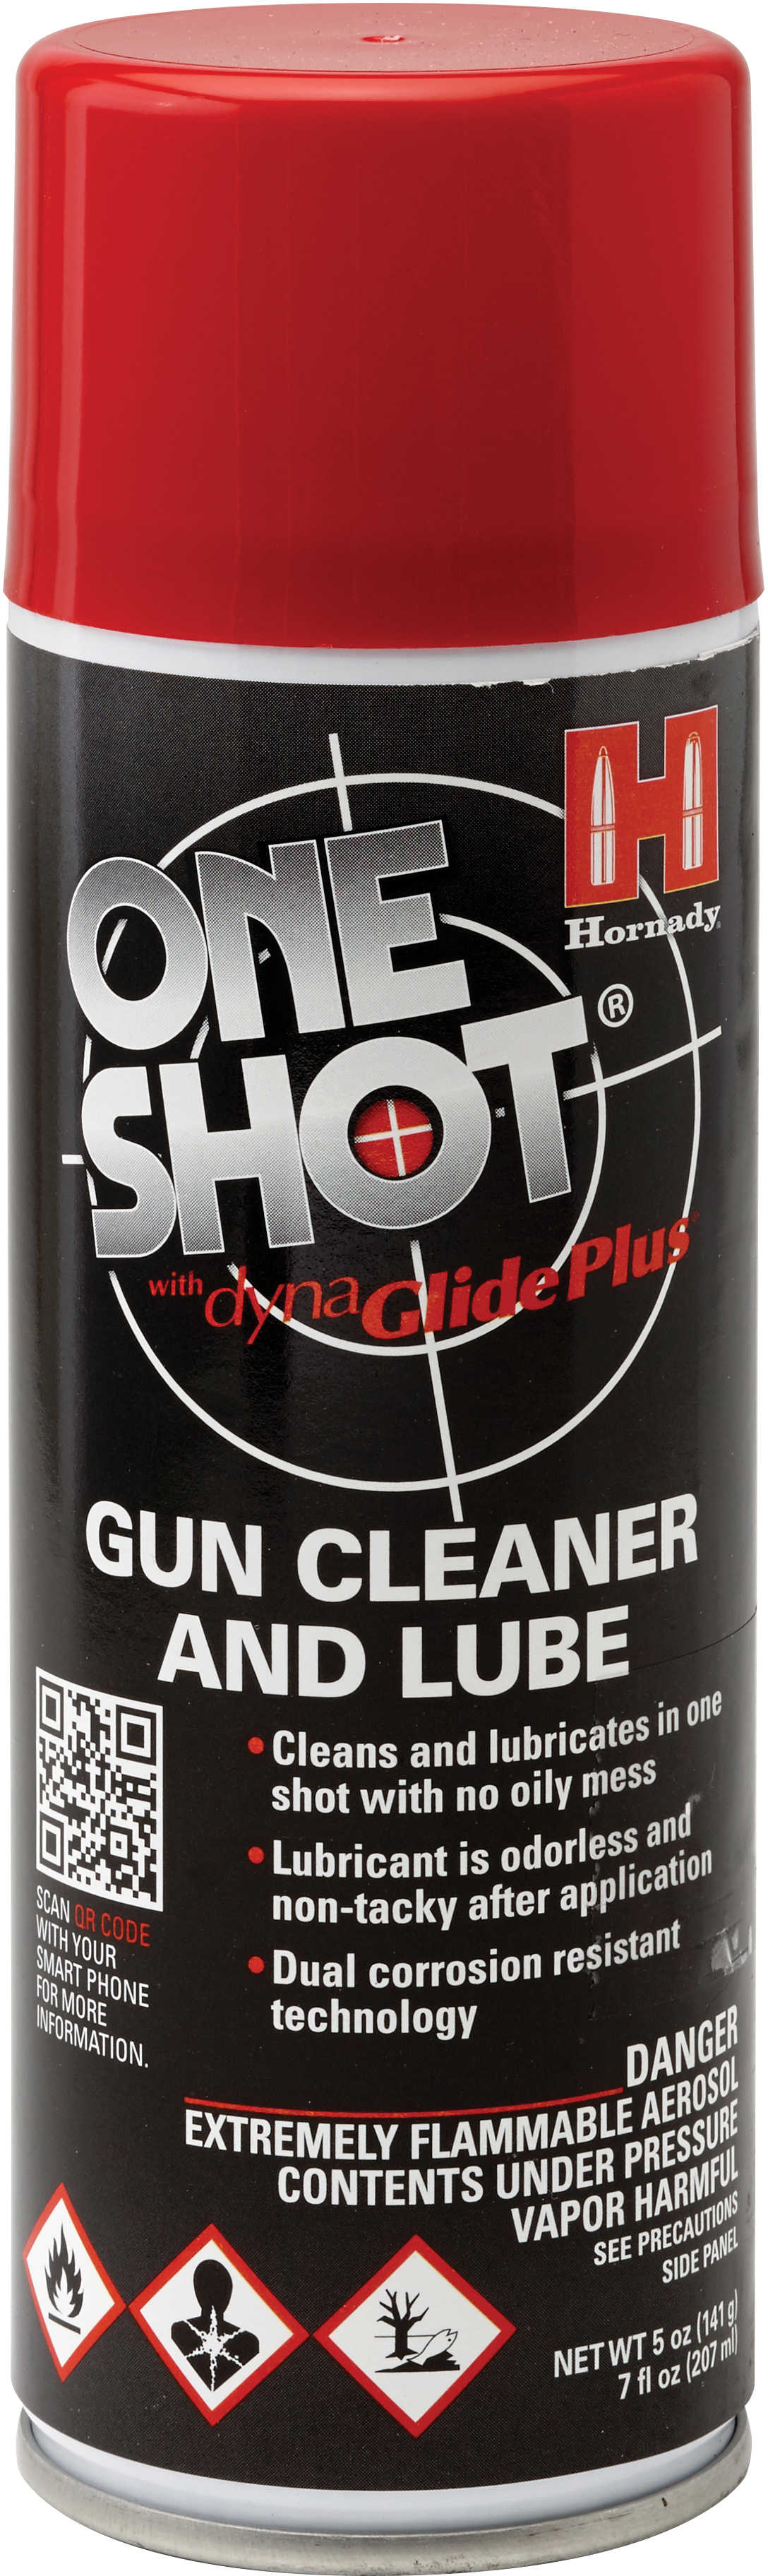 Hornady One-Shot Gun Cleaner / Dry Lube with Dyna Glide Plus 5.5 oz, Model: 9990